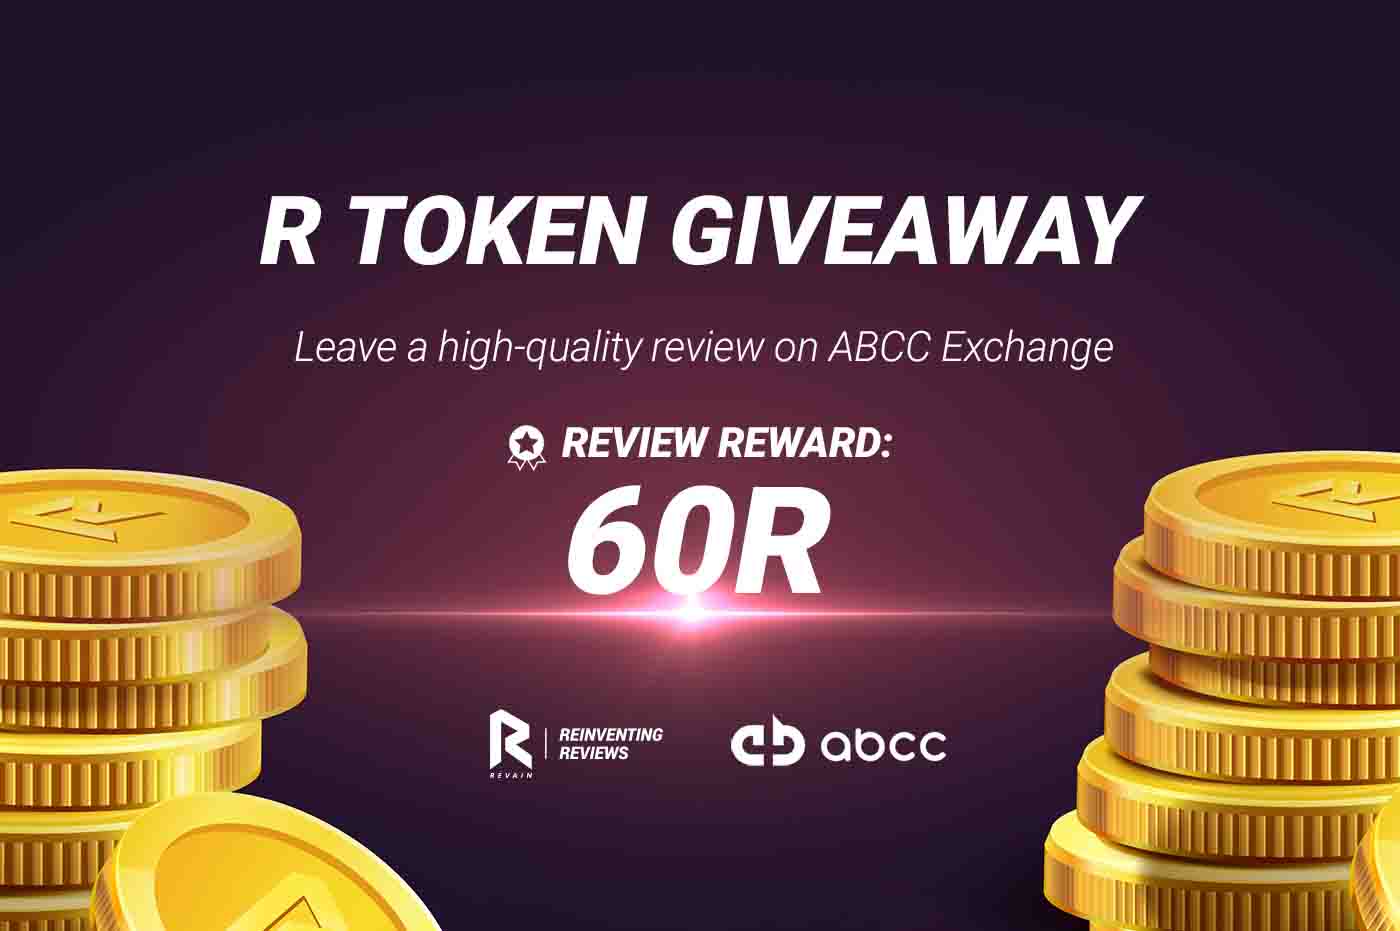 New GIVEAWAY is here. 60 R tokens for writing a high-quality review. Join!